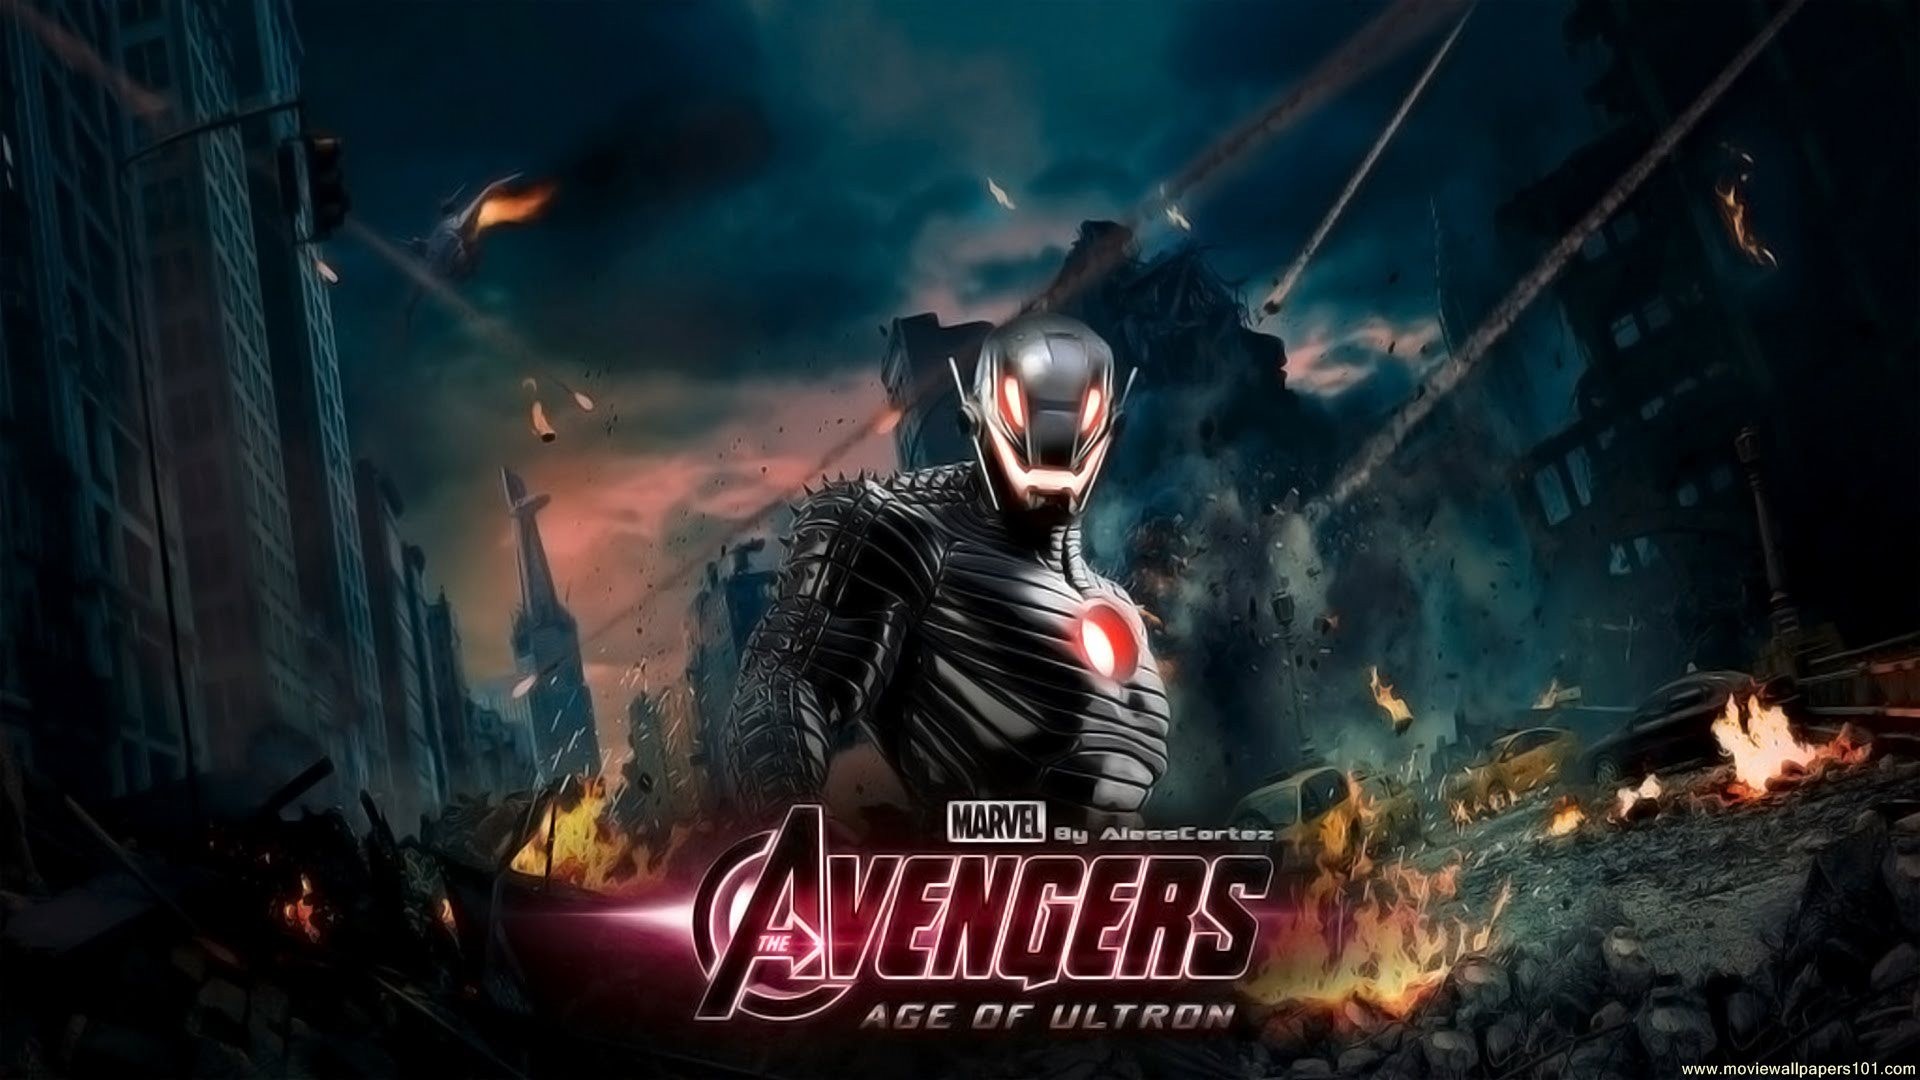 1920x1080 Avengers Age of Ultron wallpaper - () : MovieWallpapers101 .